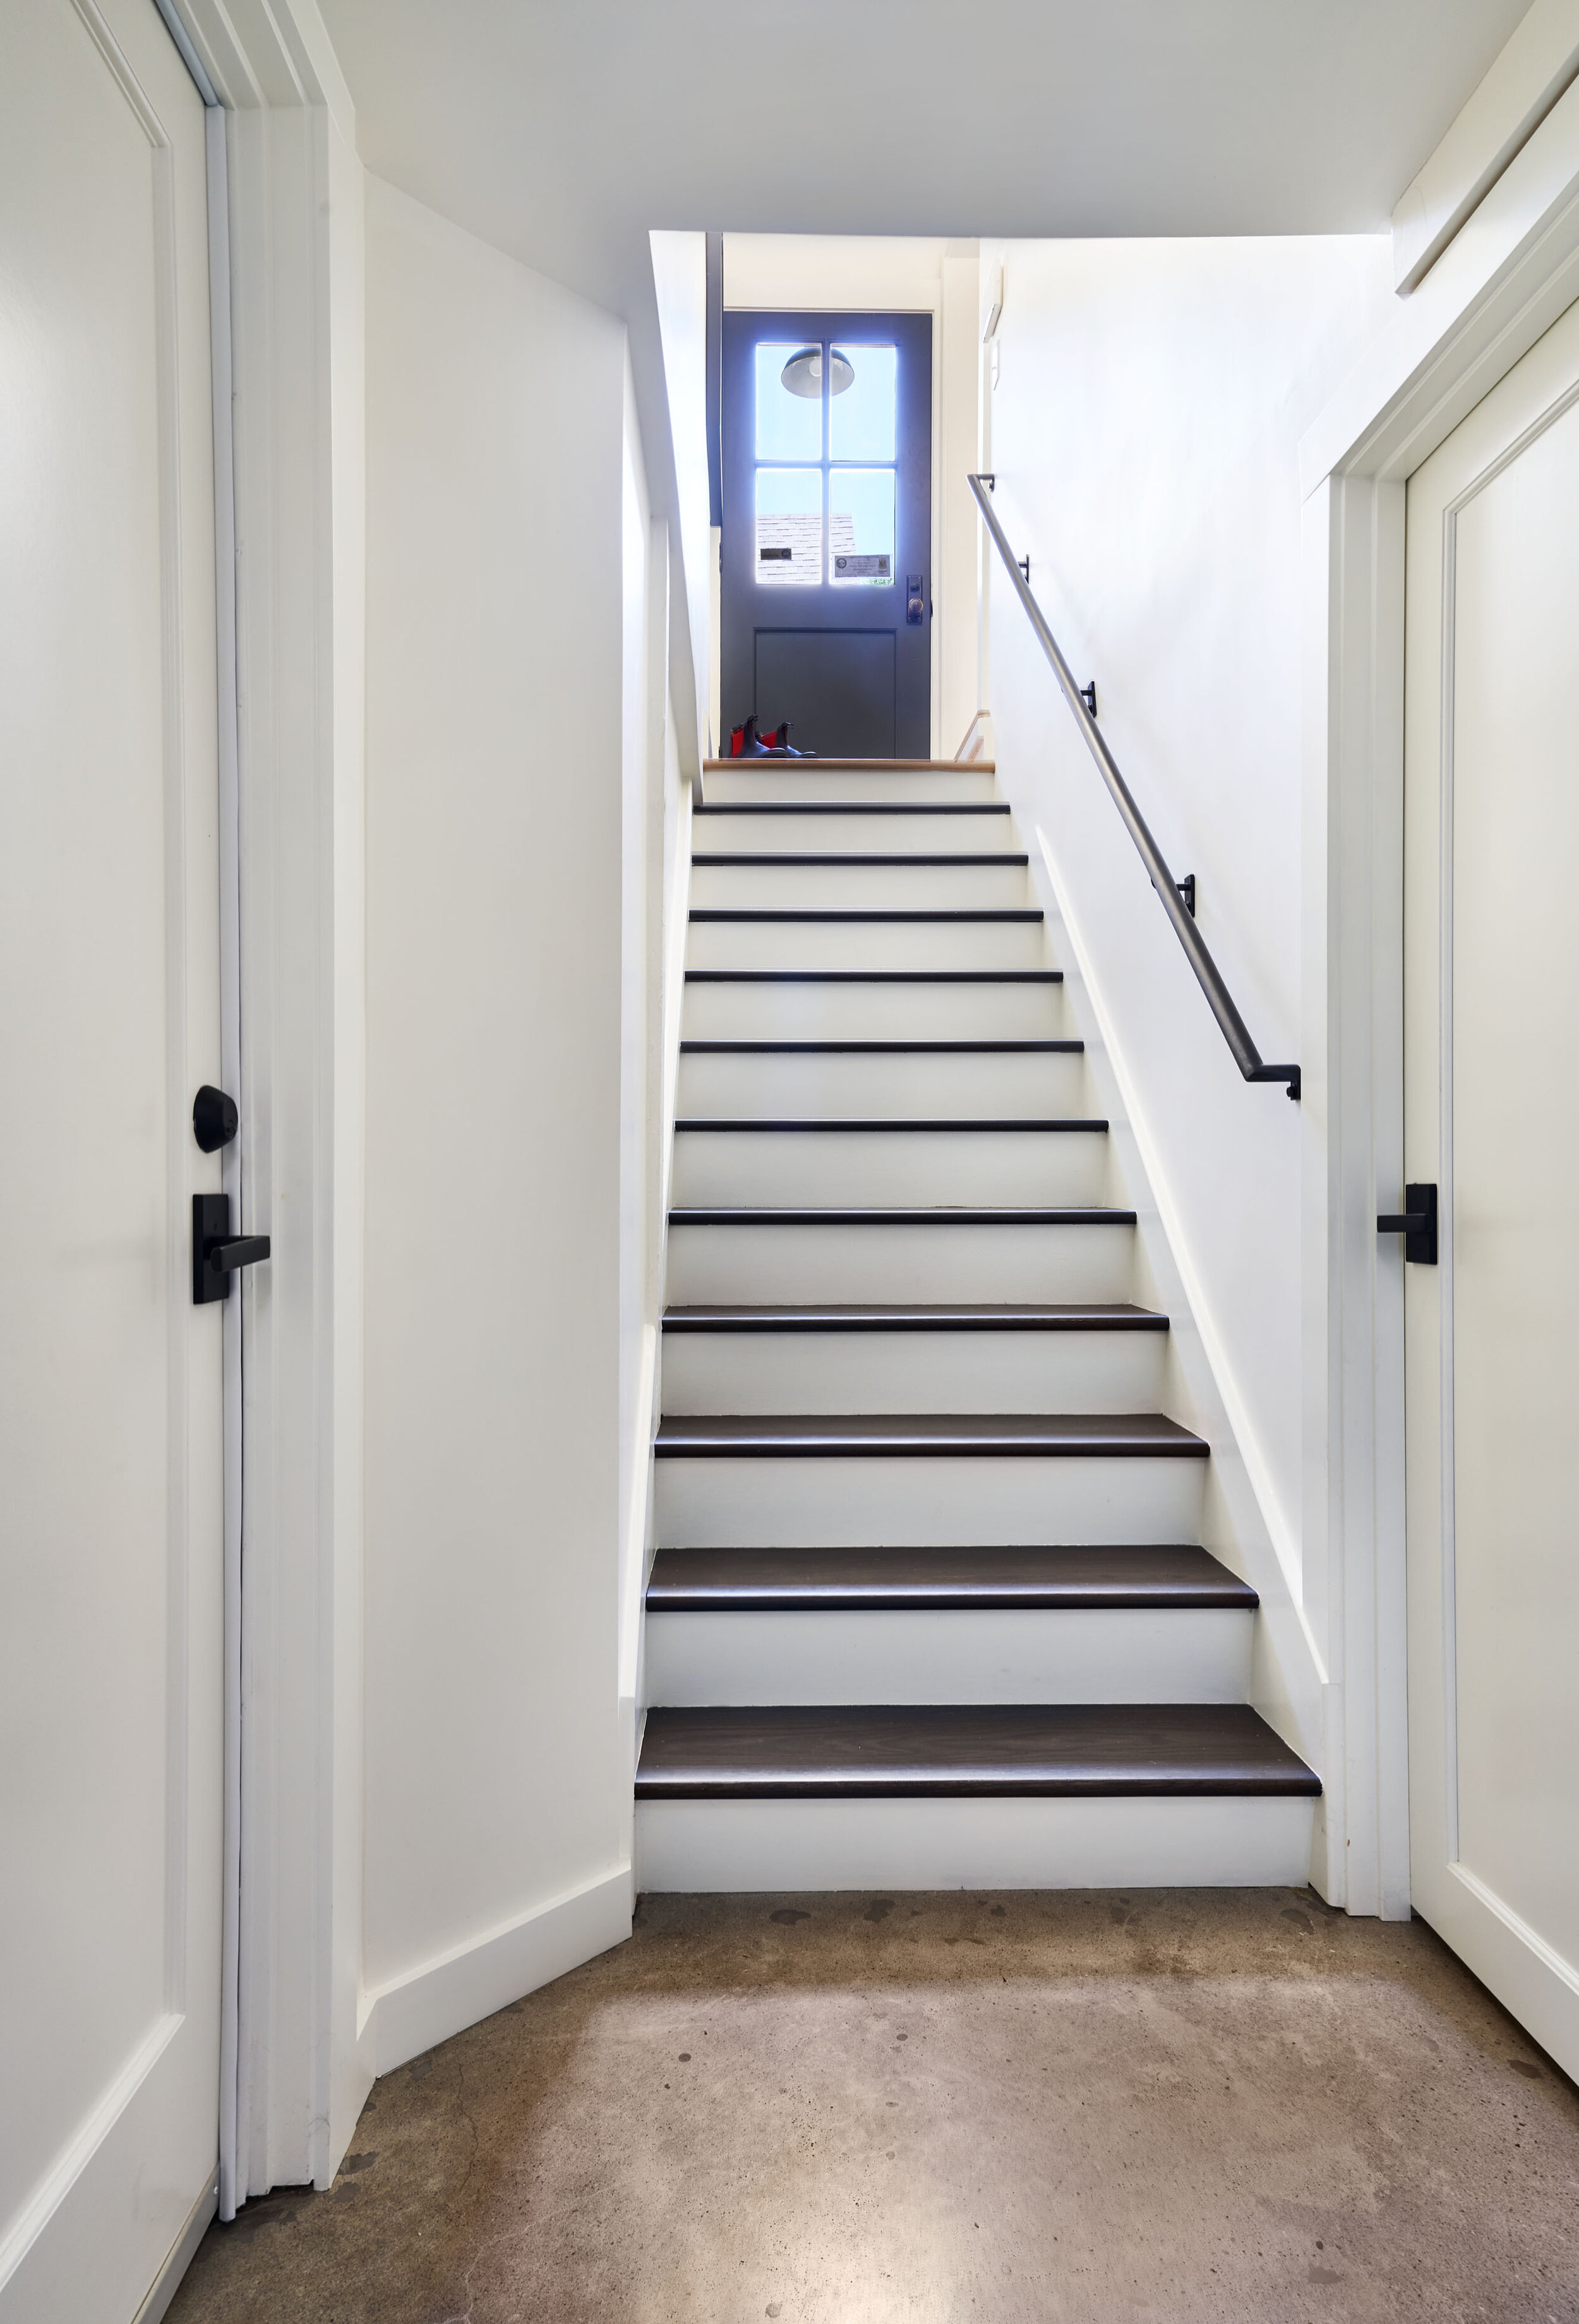 New and improved stair treads and risers connect seamlessly to the main part of the home.